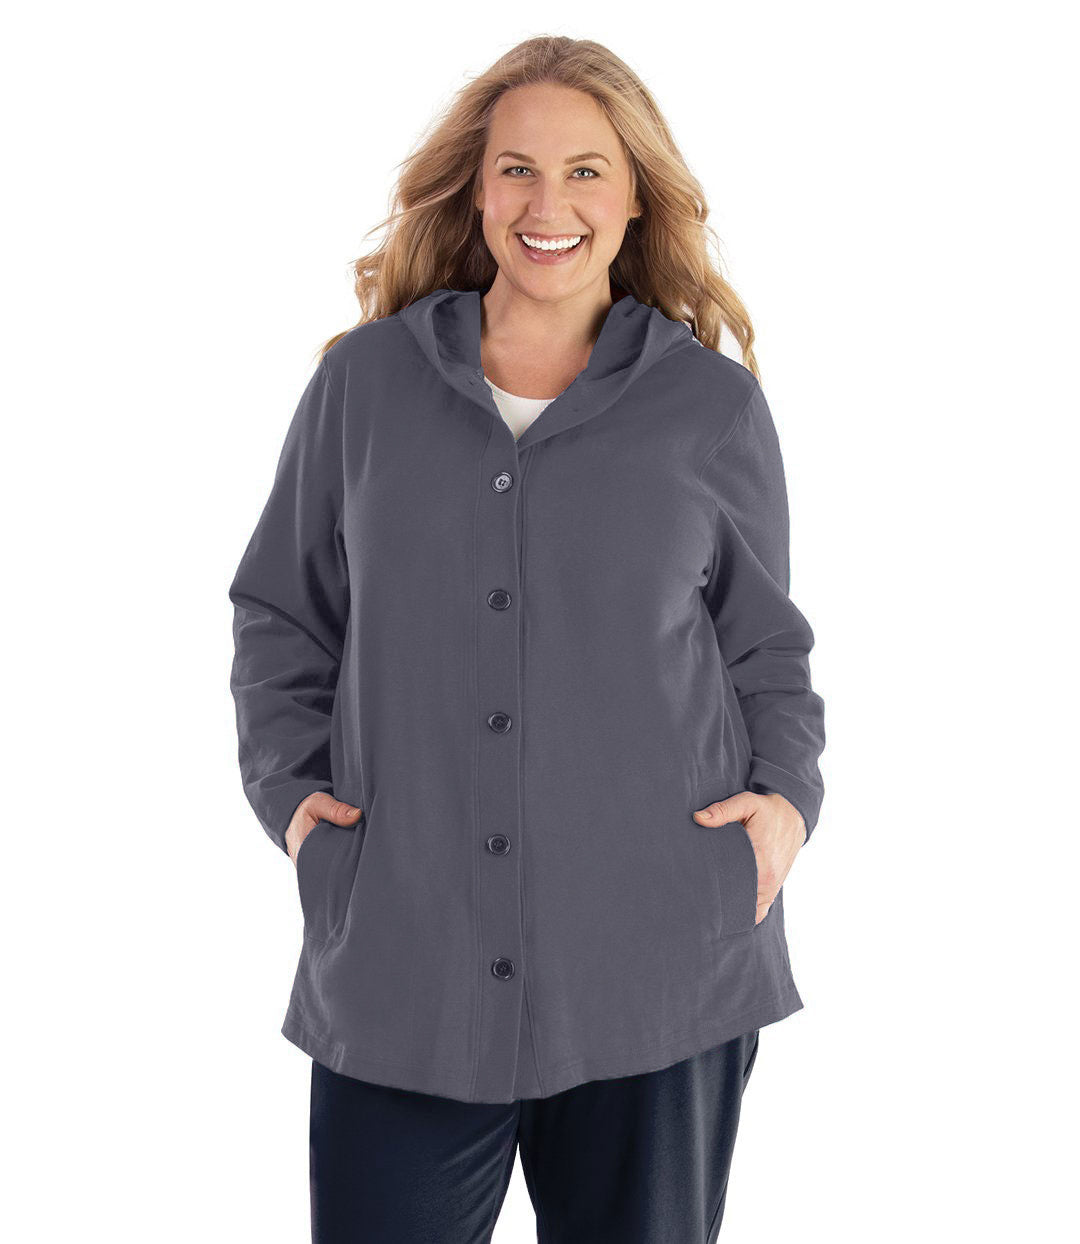 Plus size woman wearing Legacy Cotton Casual Button Up Hoodie in Misty Grey. Both hands are in side pockets of hoodie.